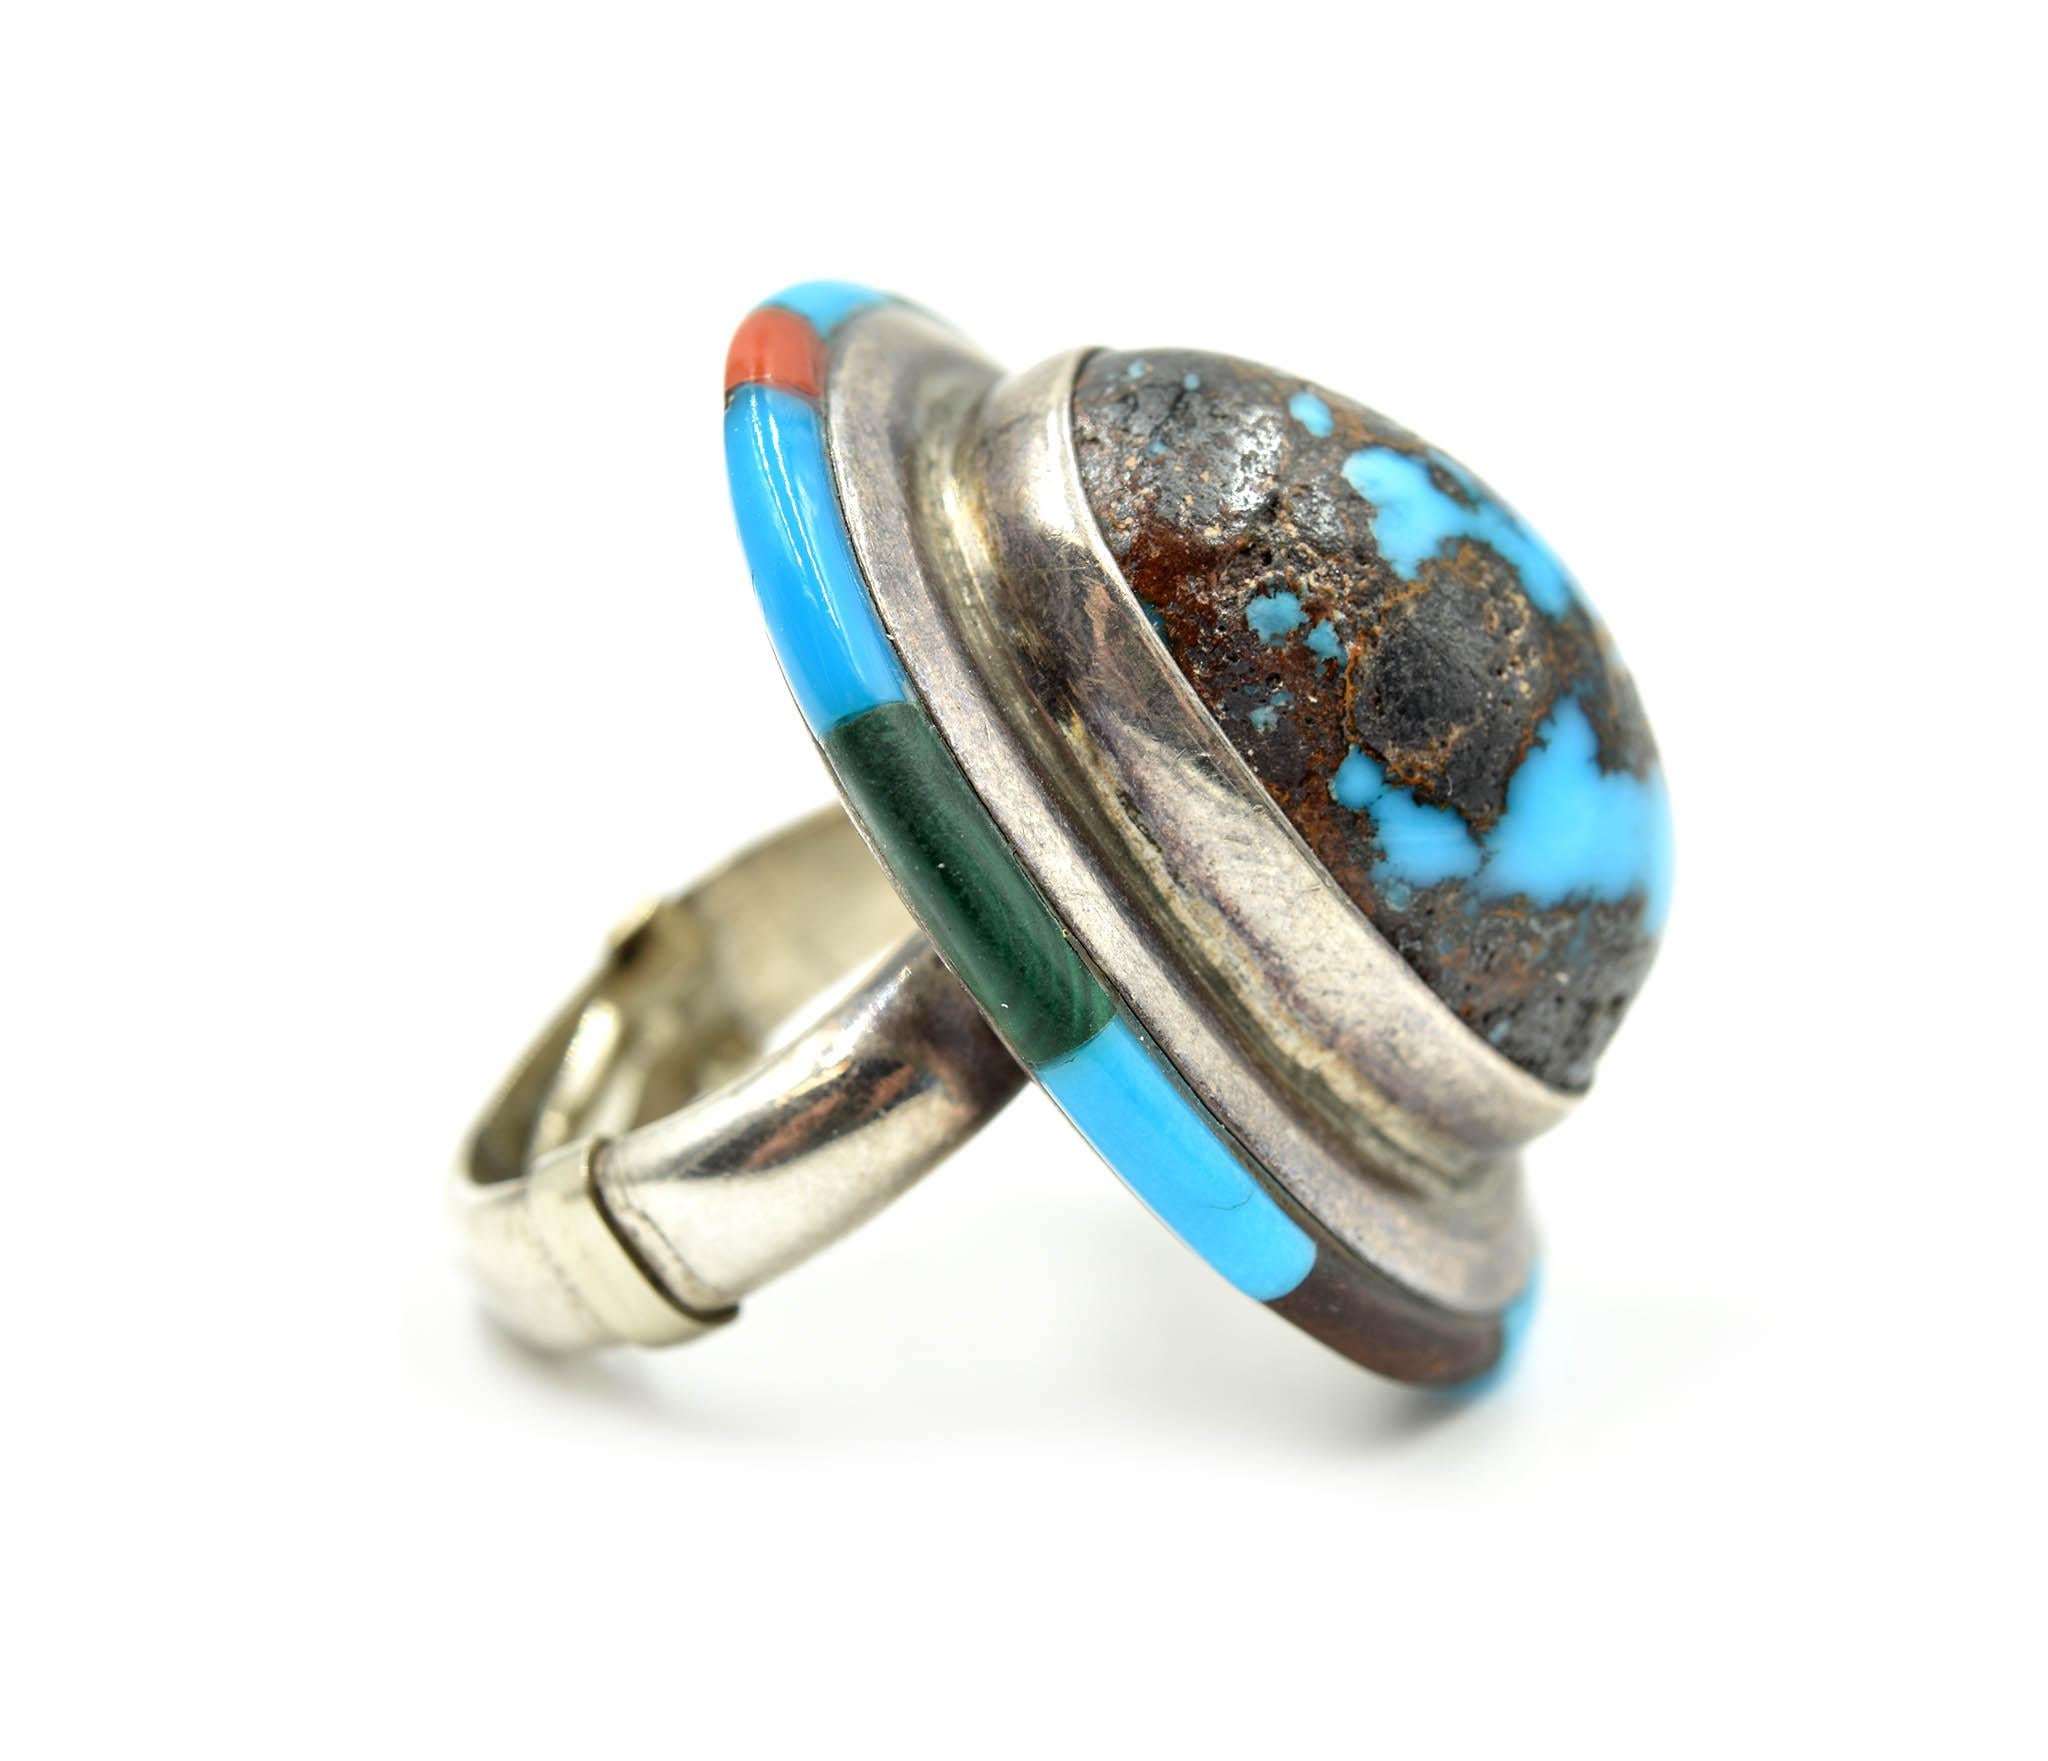 Designer: Sanchez
Material: sterling silver
Gemstones: turquoise, lapis, coral and malachite
Ring Size: 6 
Weight: 27.35 grams

